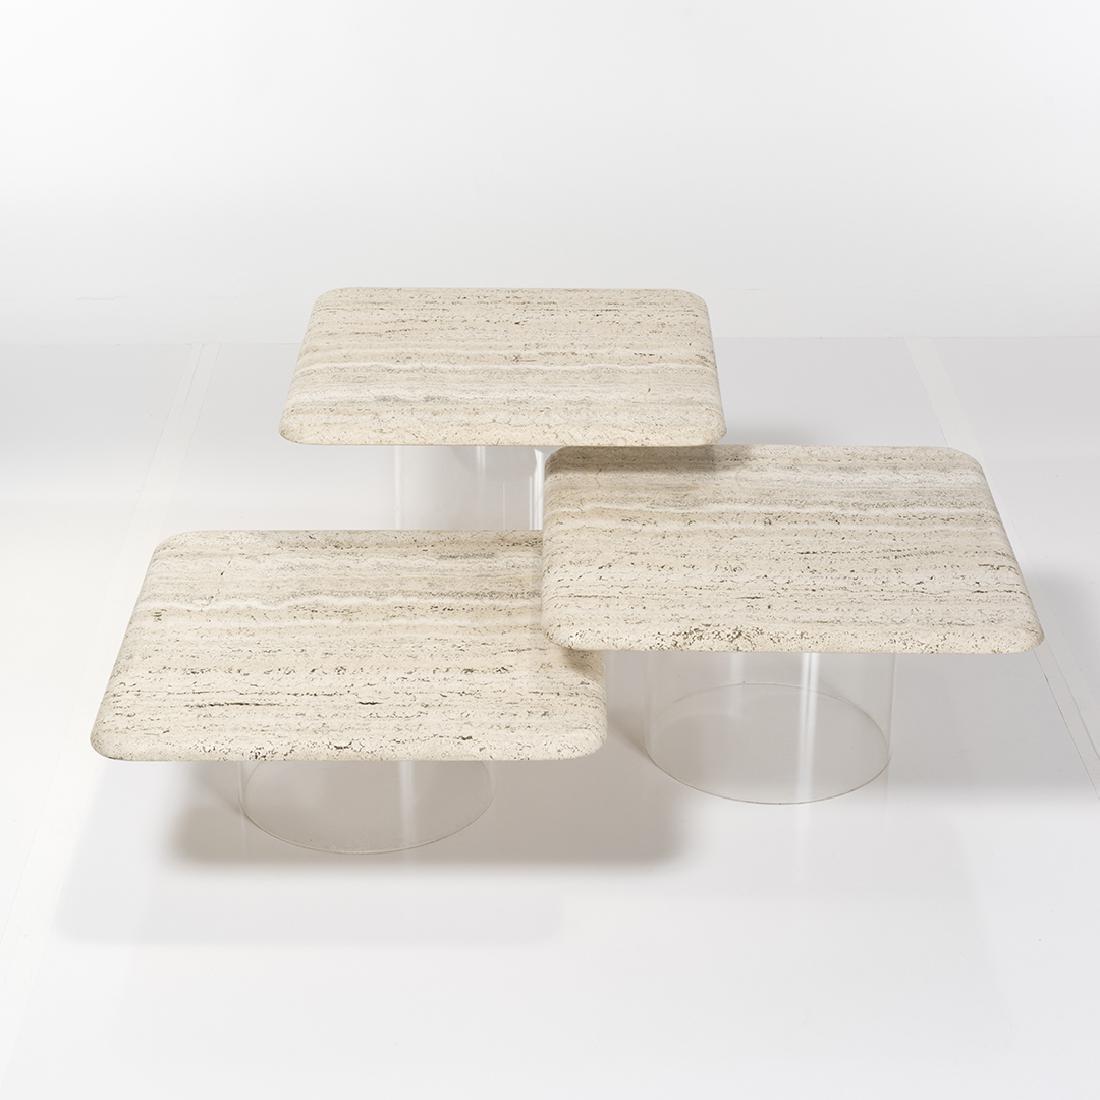 A gorgeous set of three (3) nesting tables made with cylindrical Lucite bases topped by natural travertine squares with soft curved edges. Each table is 22